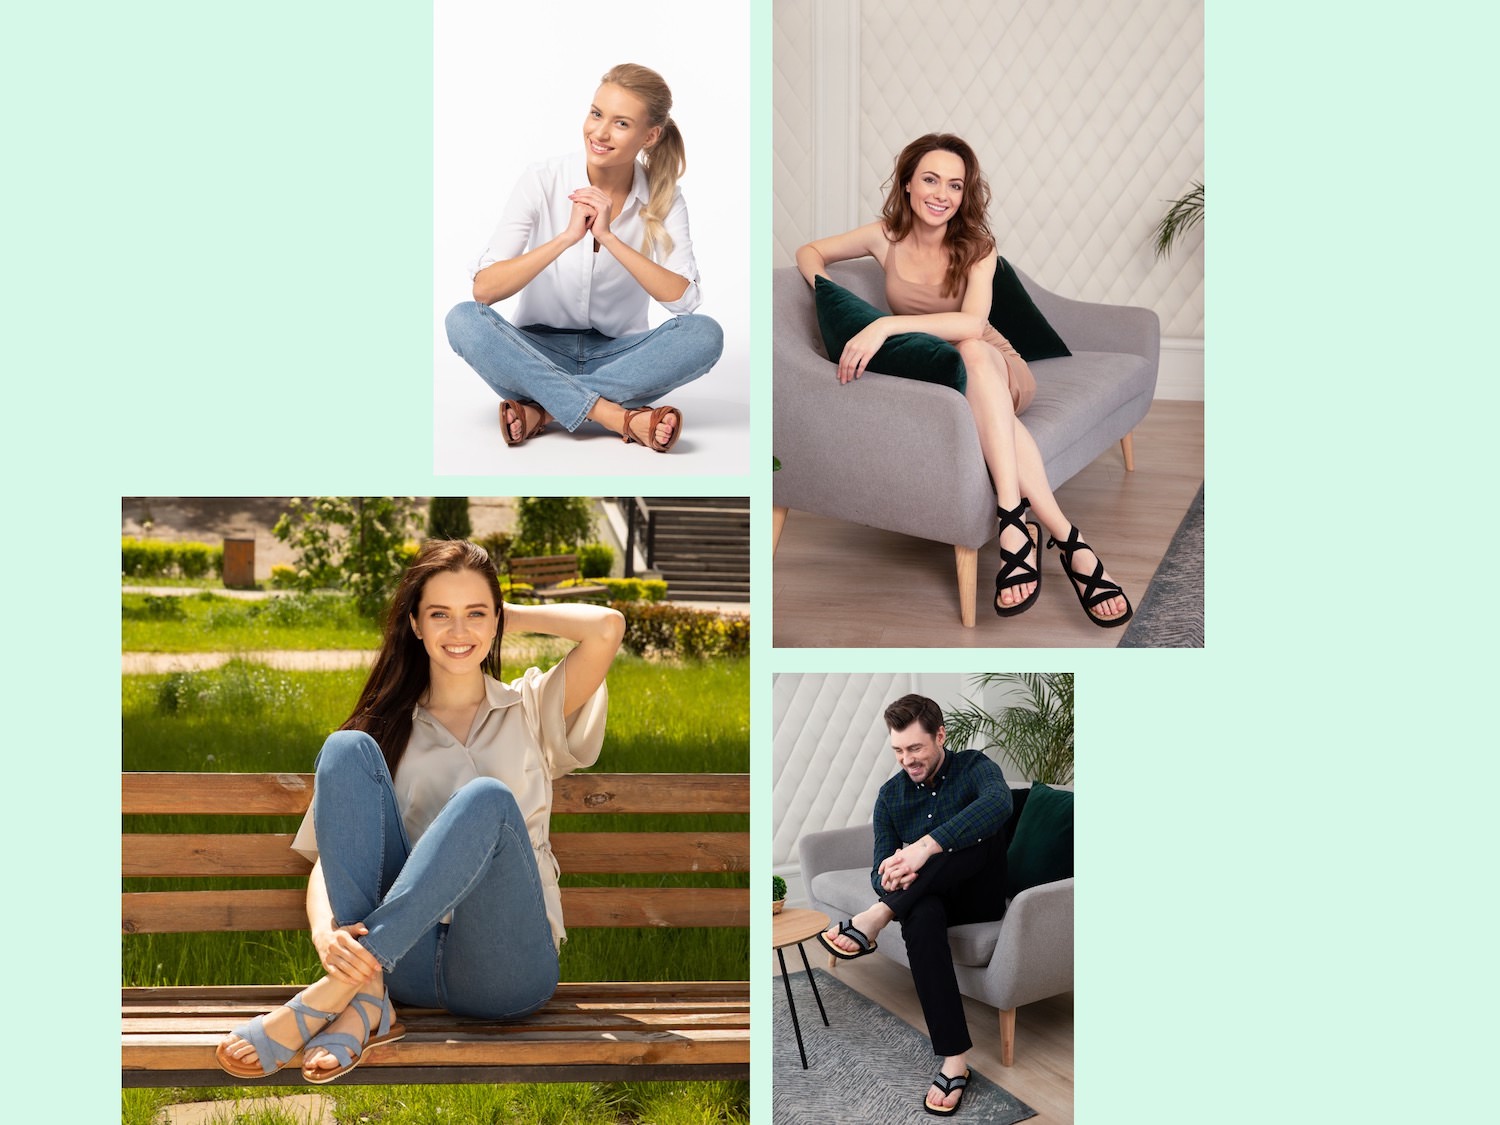 Collage of model photos for footwear brands